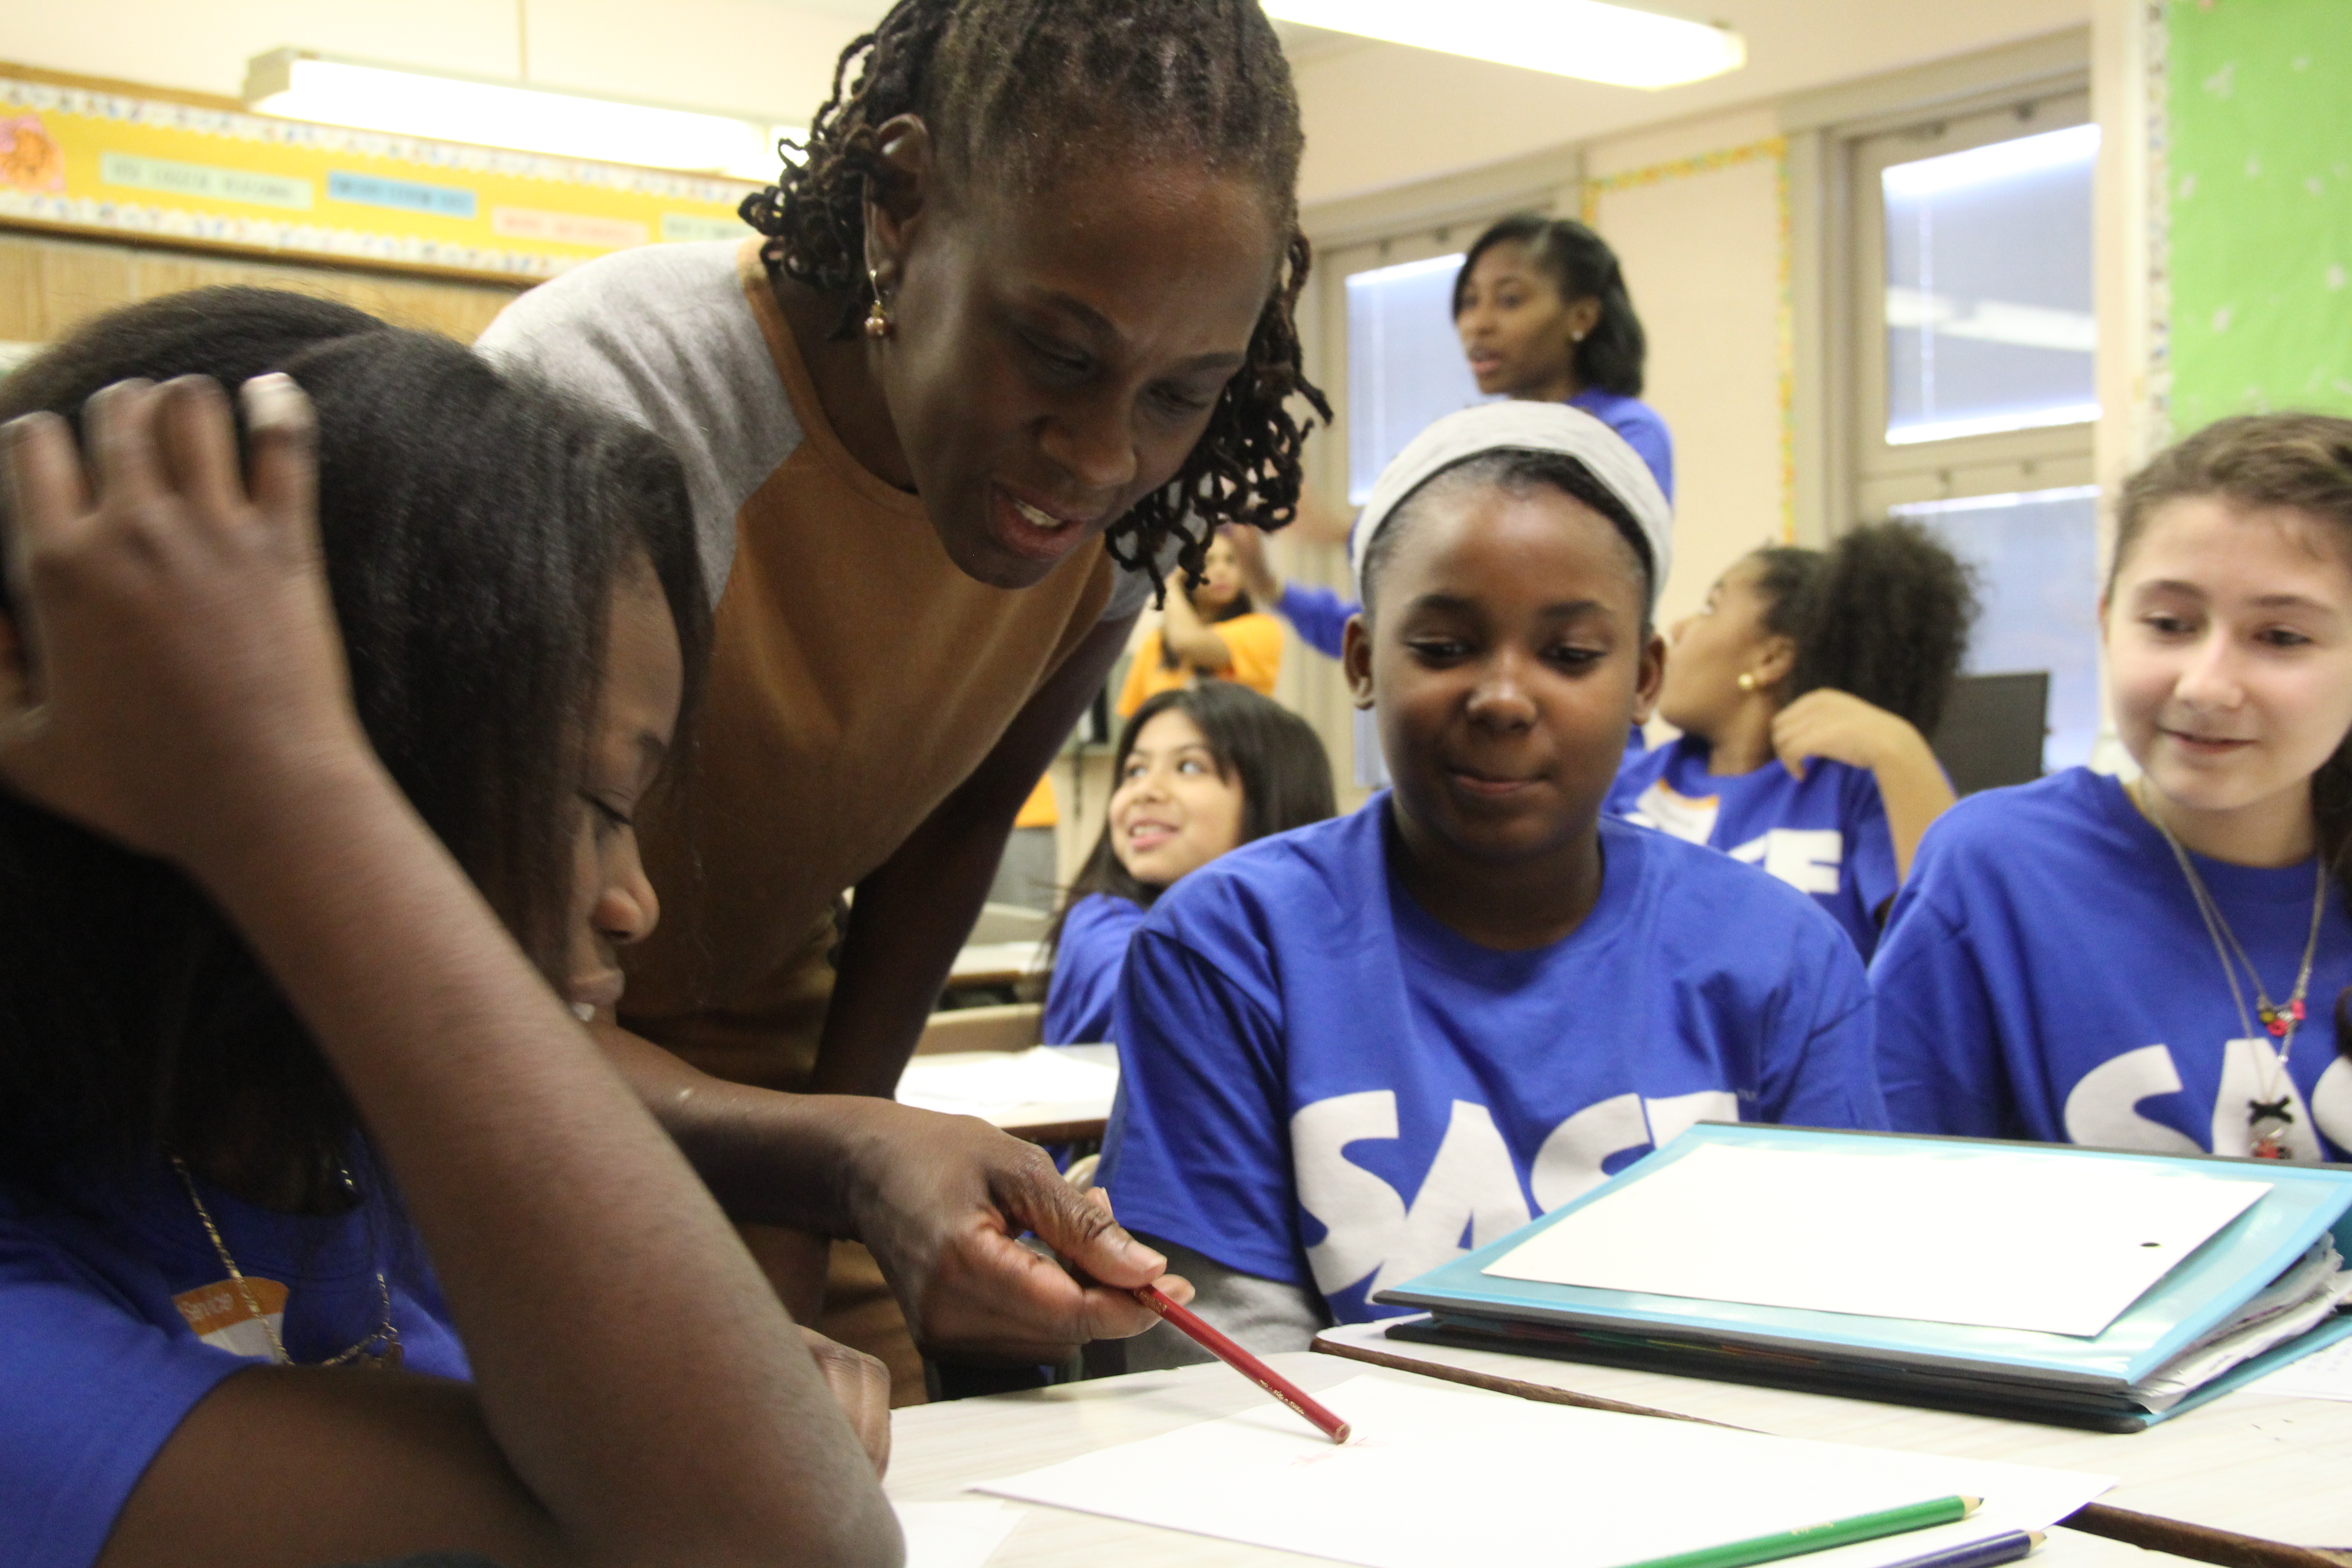 Chrilane McCray, New York City's first lady, visited a school in Hollis on Martin Luther King Jr. Day.